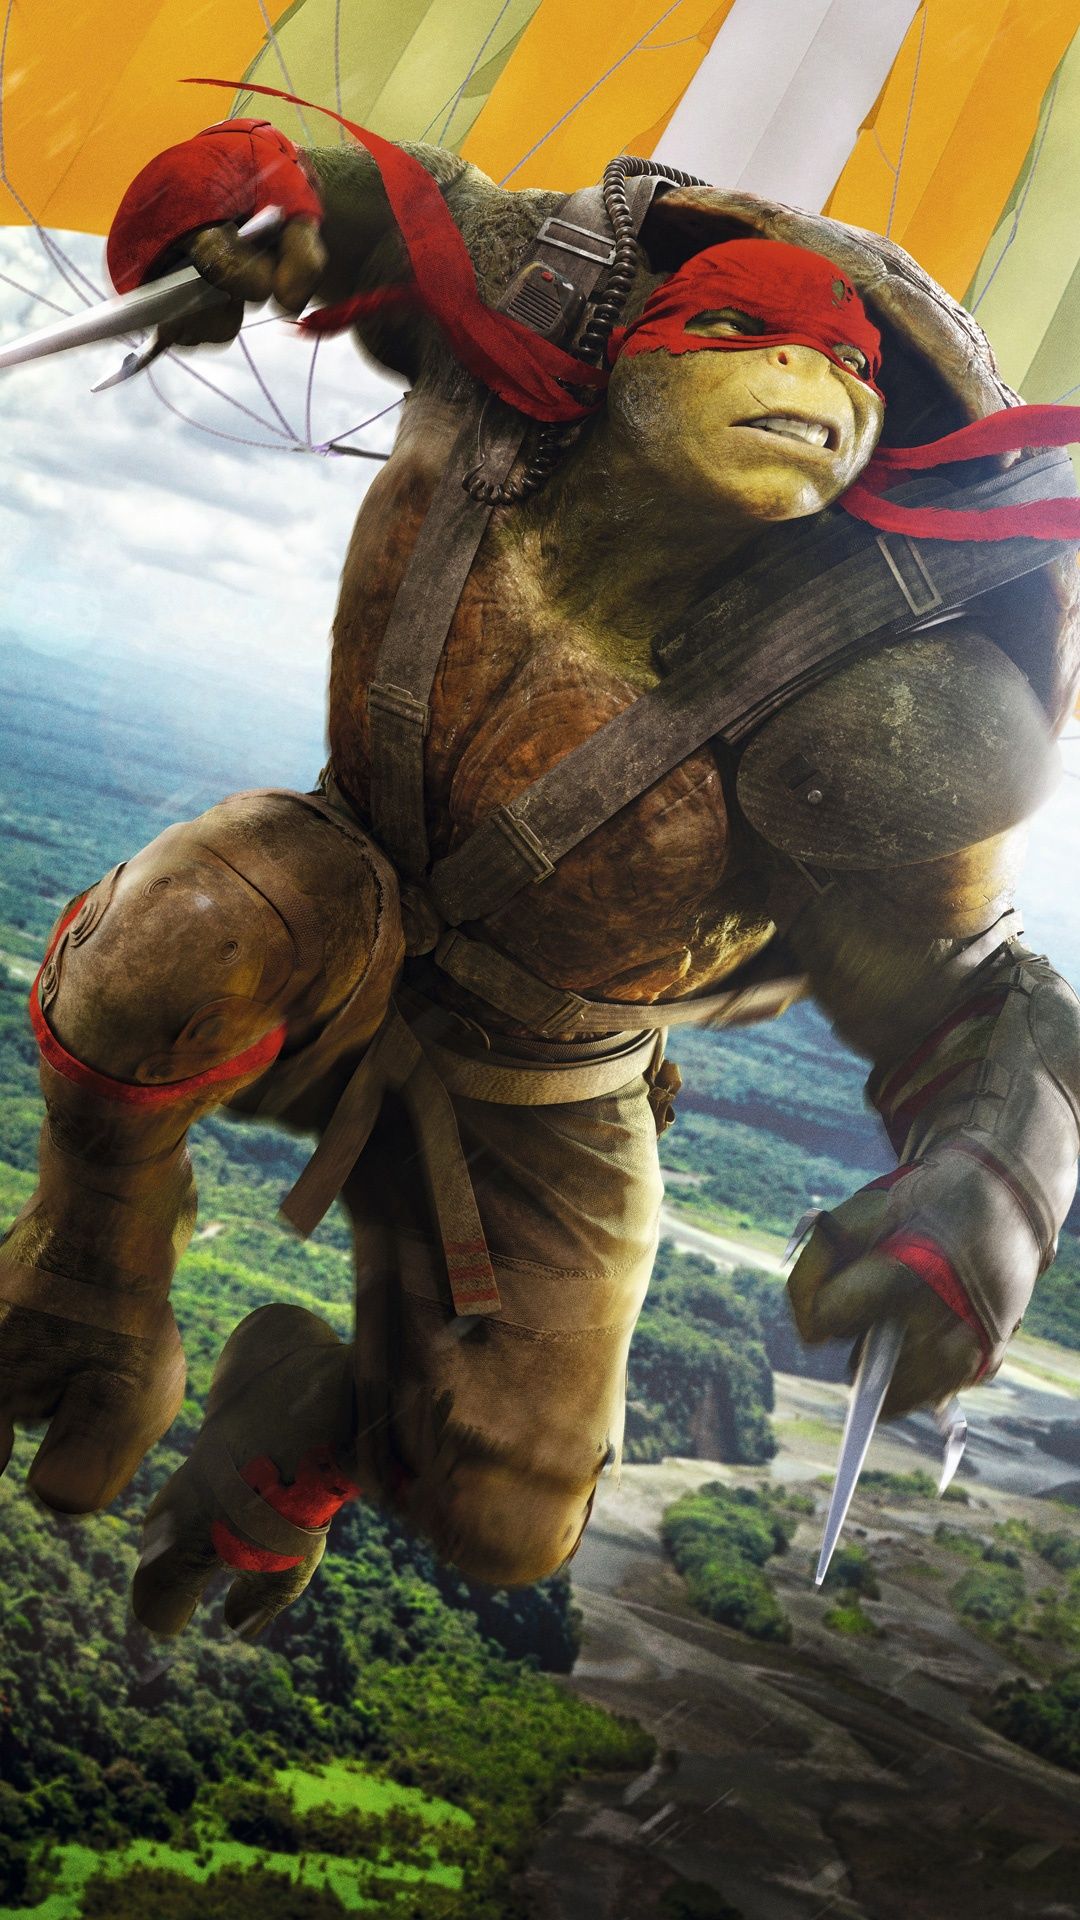 Raphael TMNT Out of the Shadows Wallpaper in jpg format for free